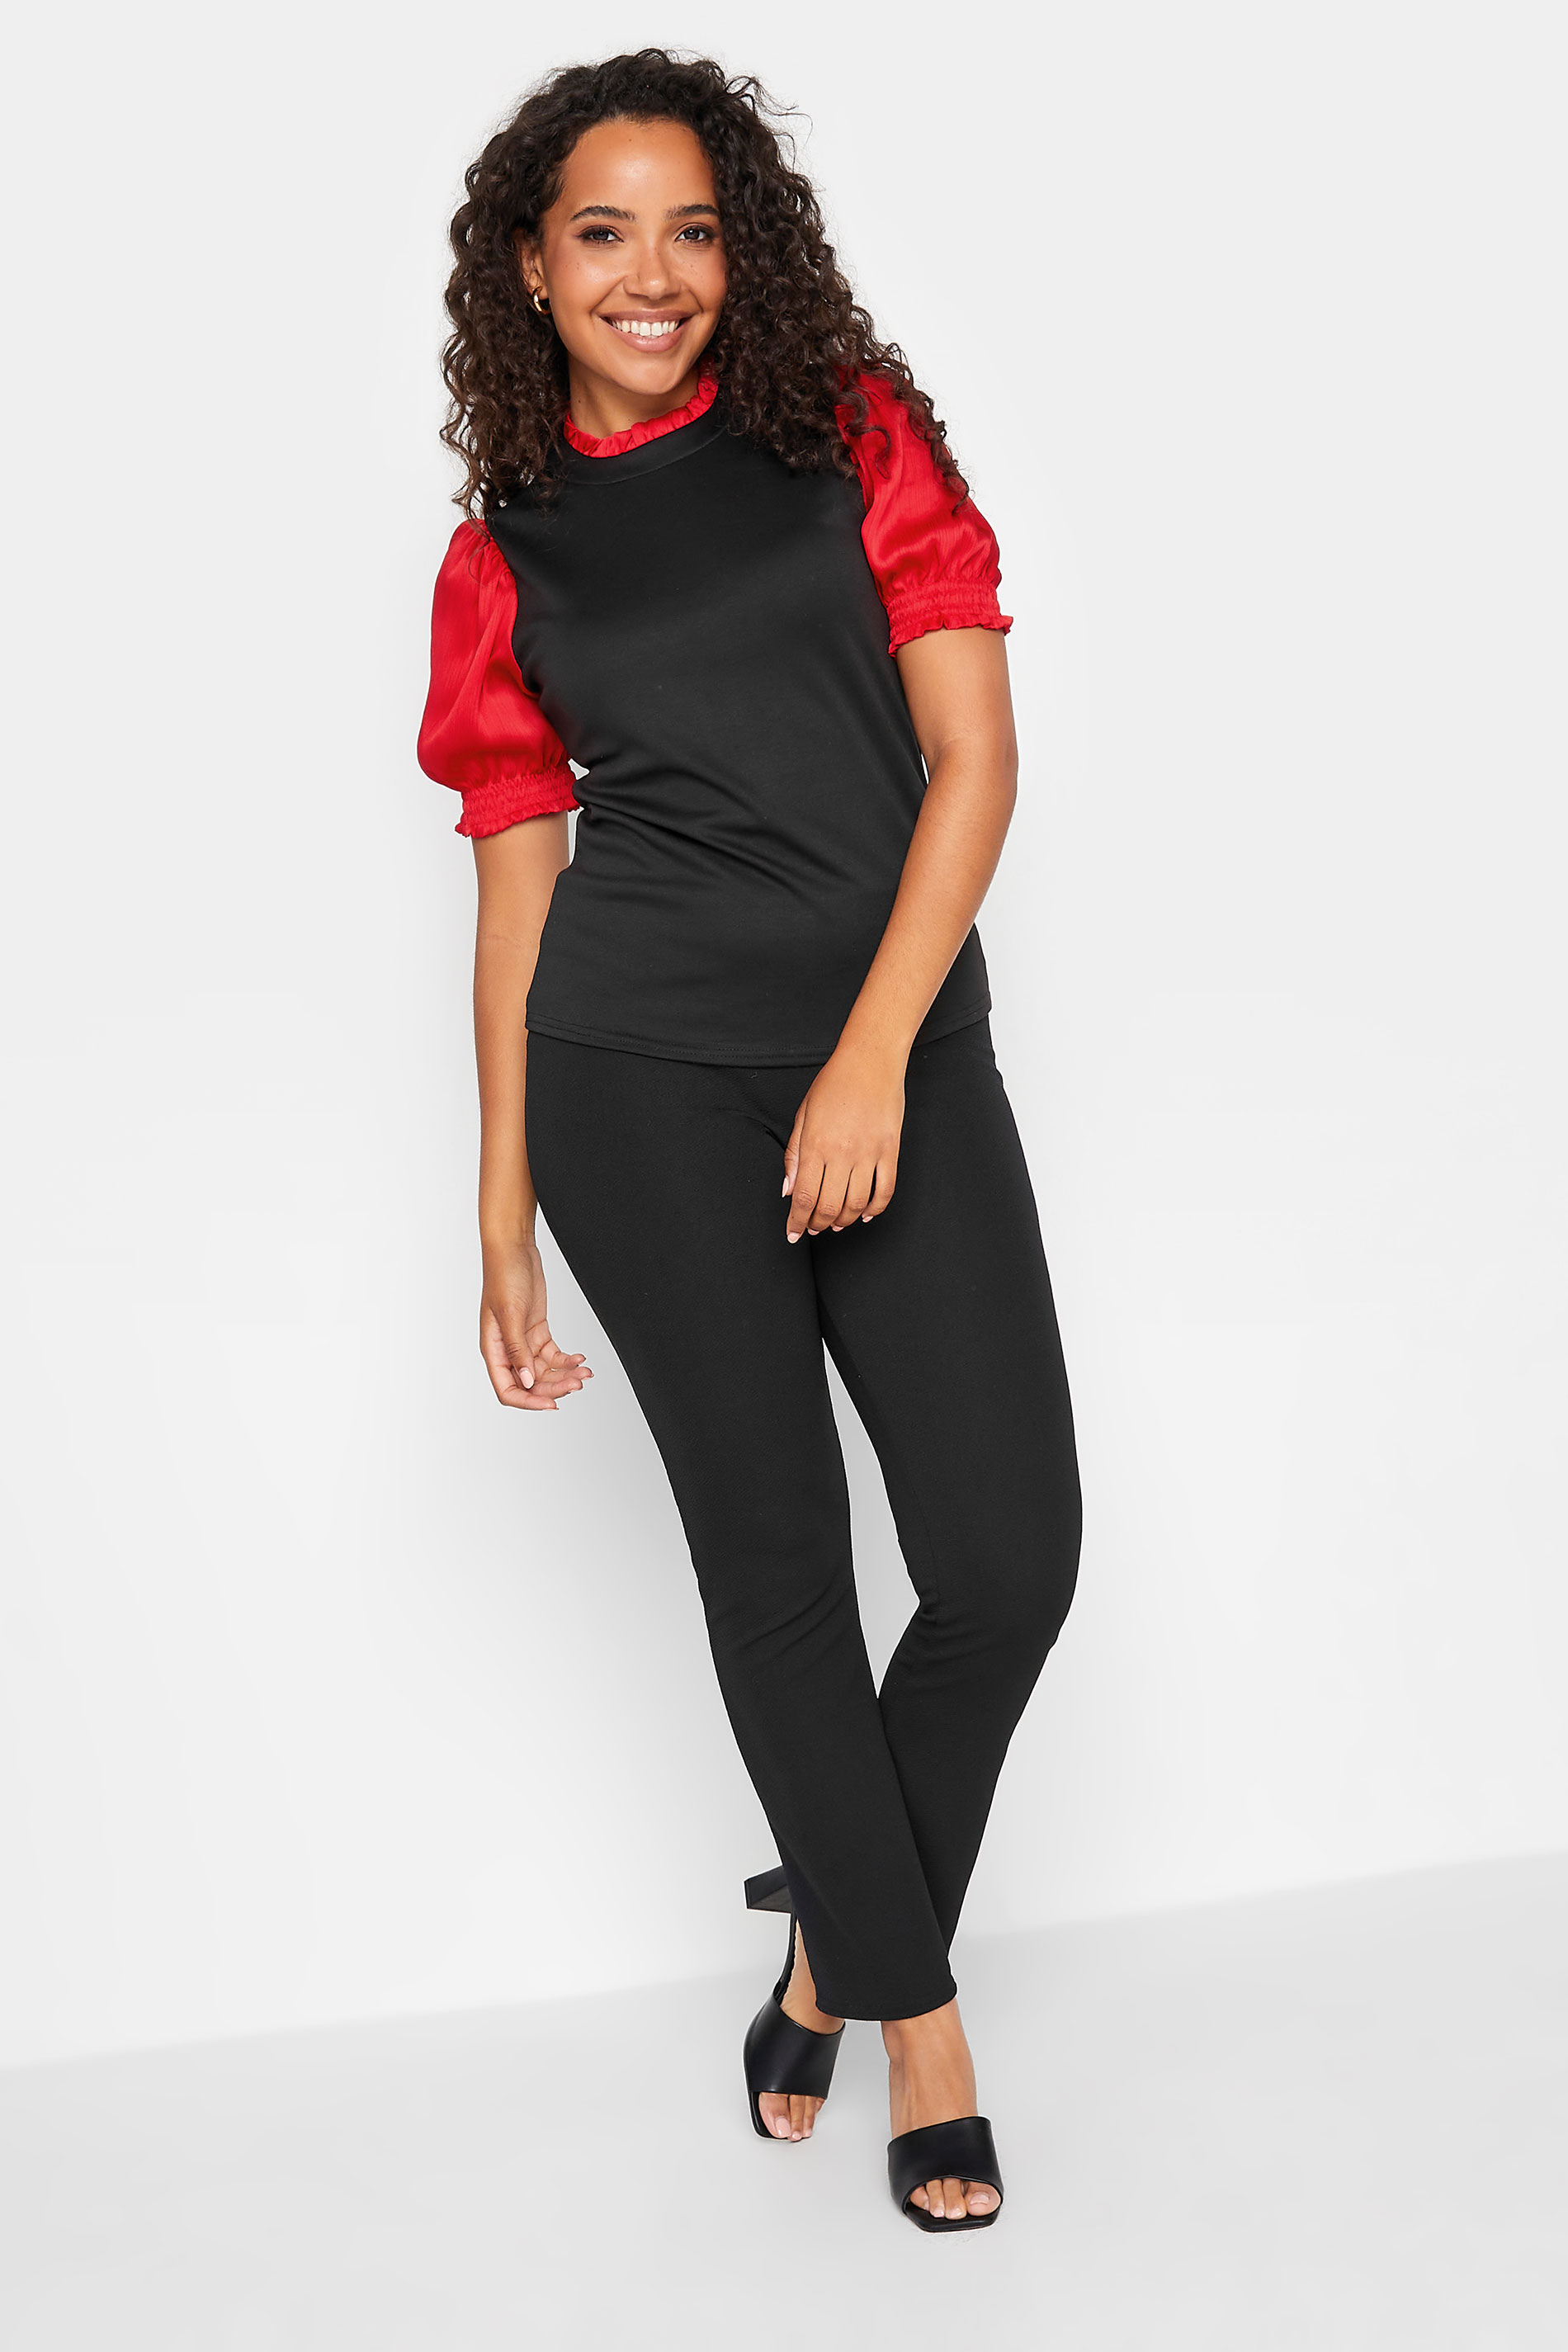 M&Co Red Contrast Sleeve Blouse | M&Co 2